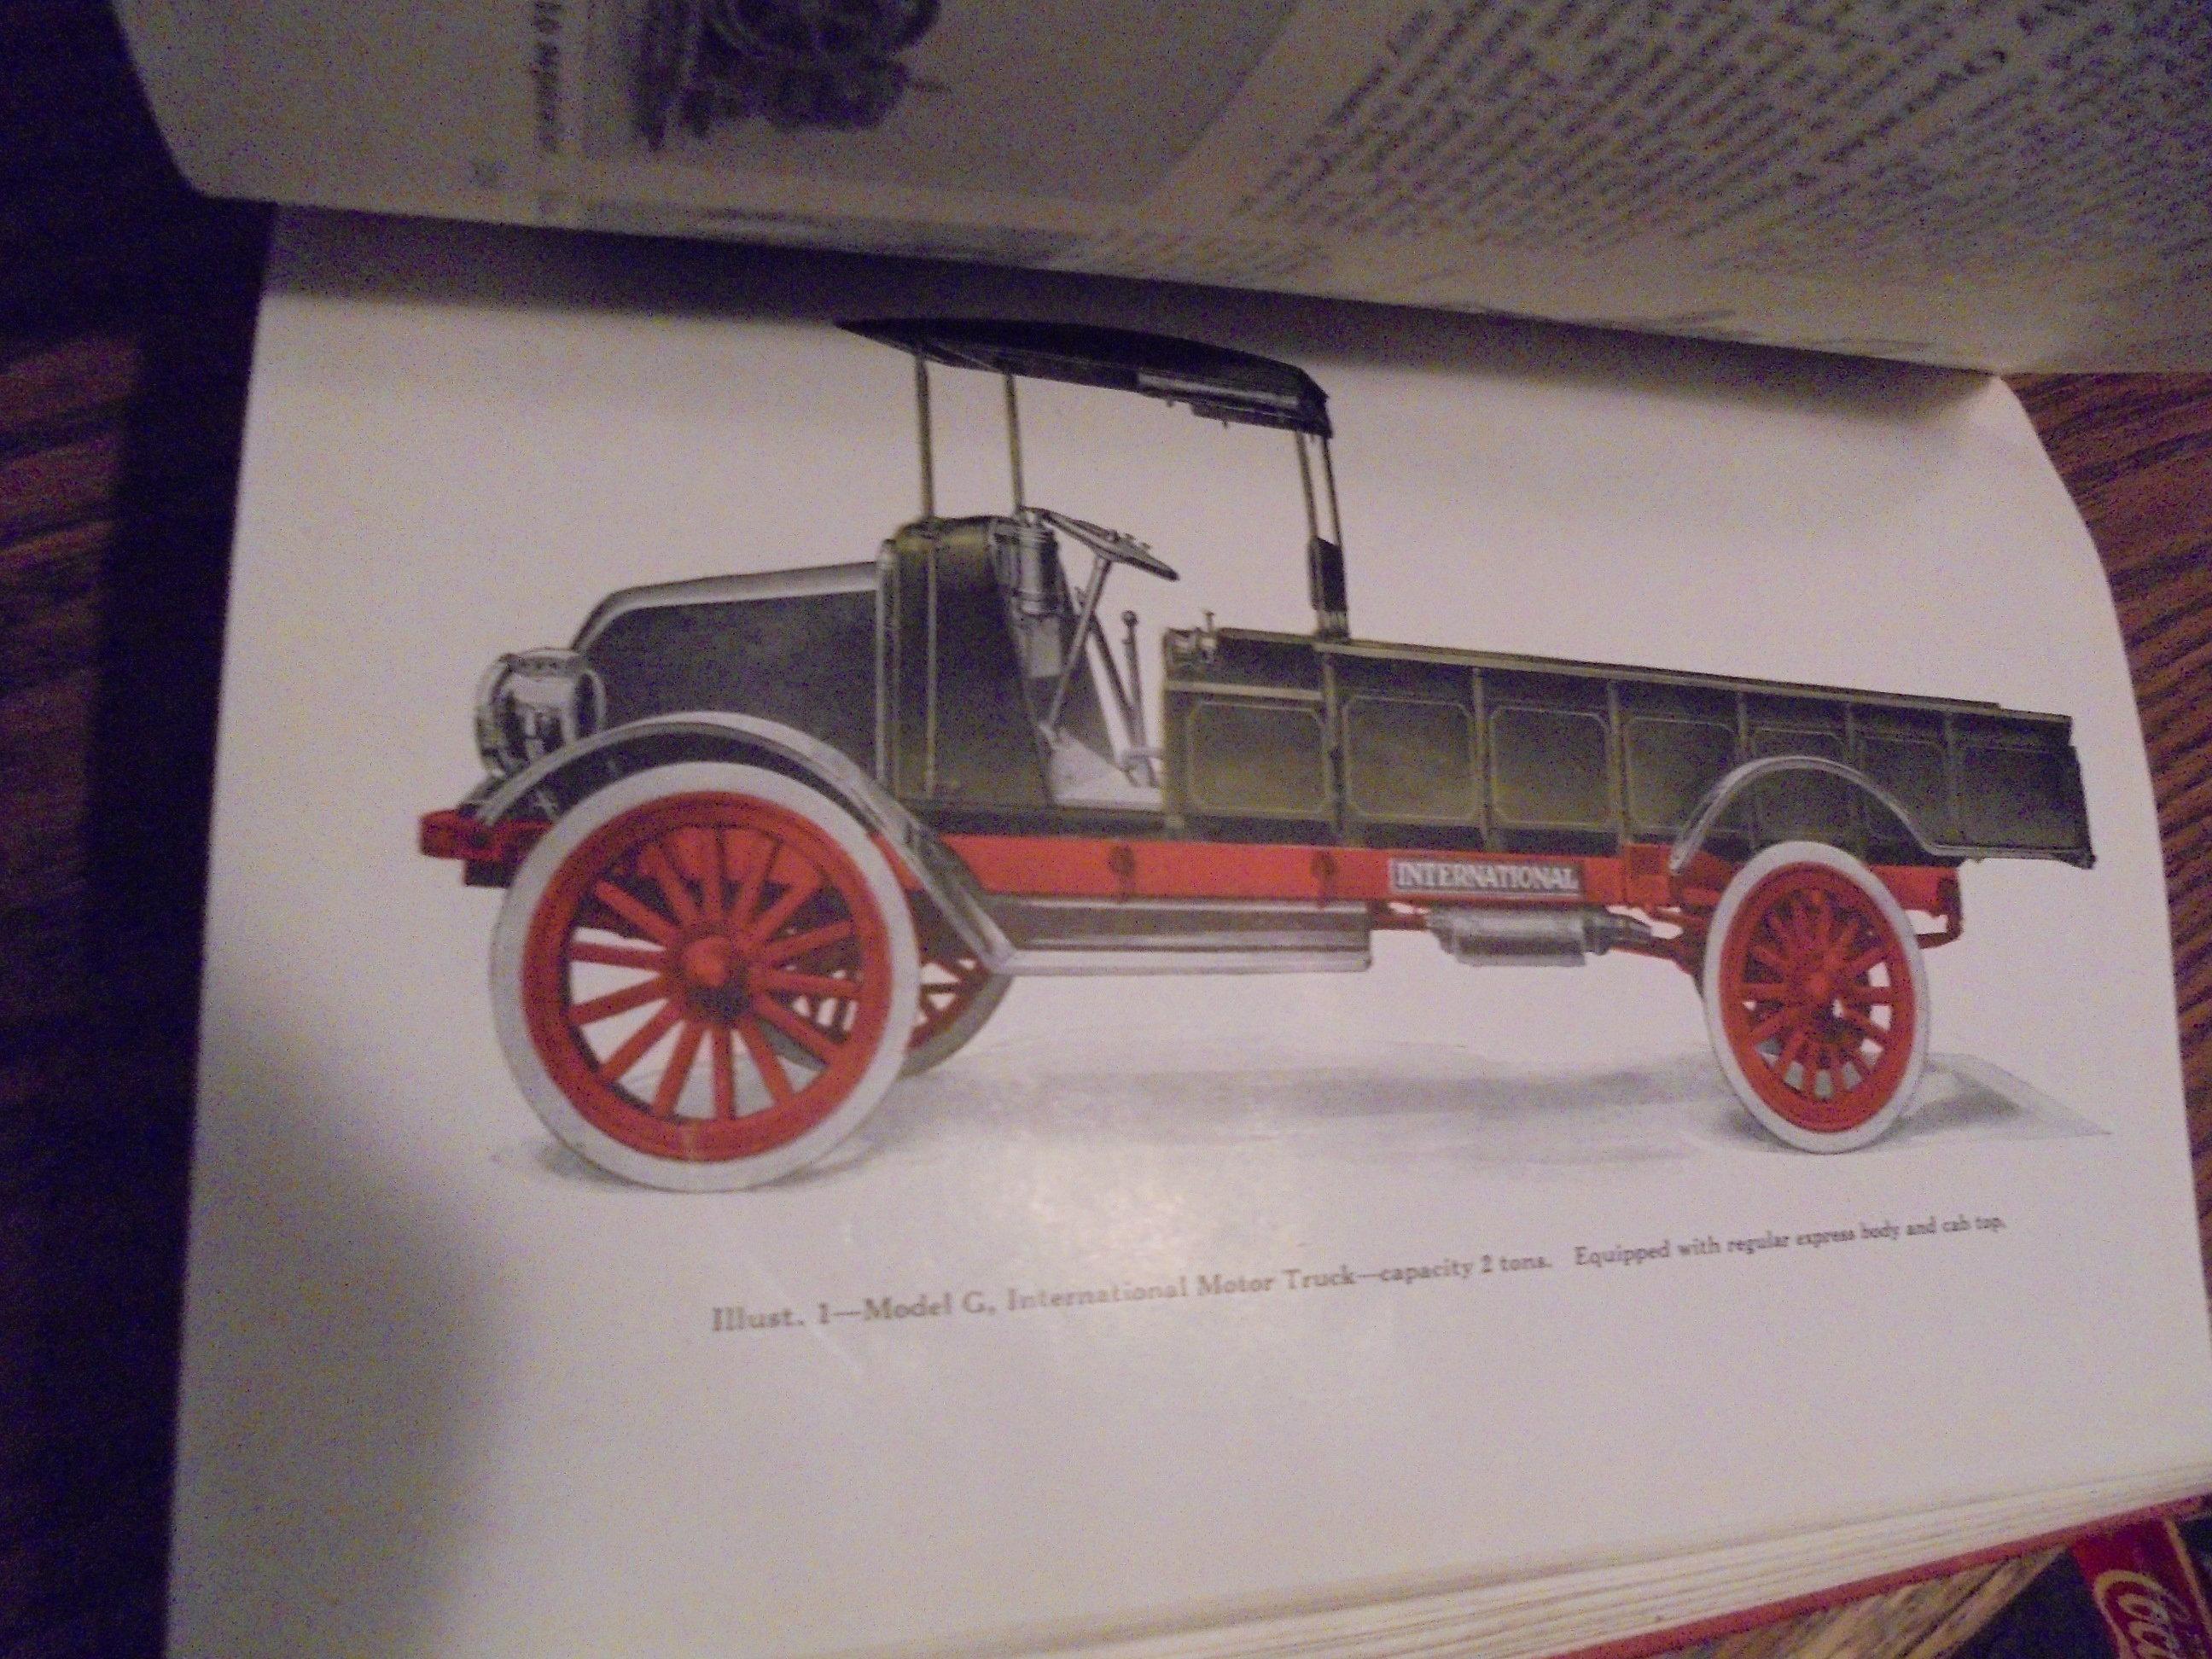 1920 "INTERNATIONAL HARVESTER FARM OPERATING EQUIPMENT" HARD BOUND BOOK-FULL OF GRAPHICS AND INFO